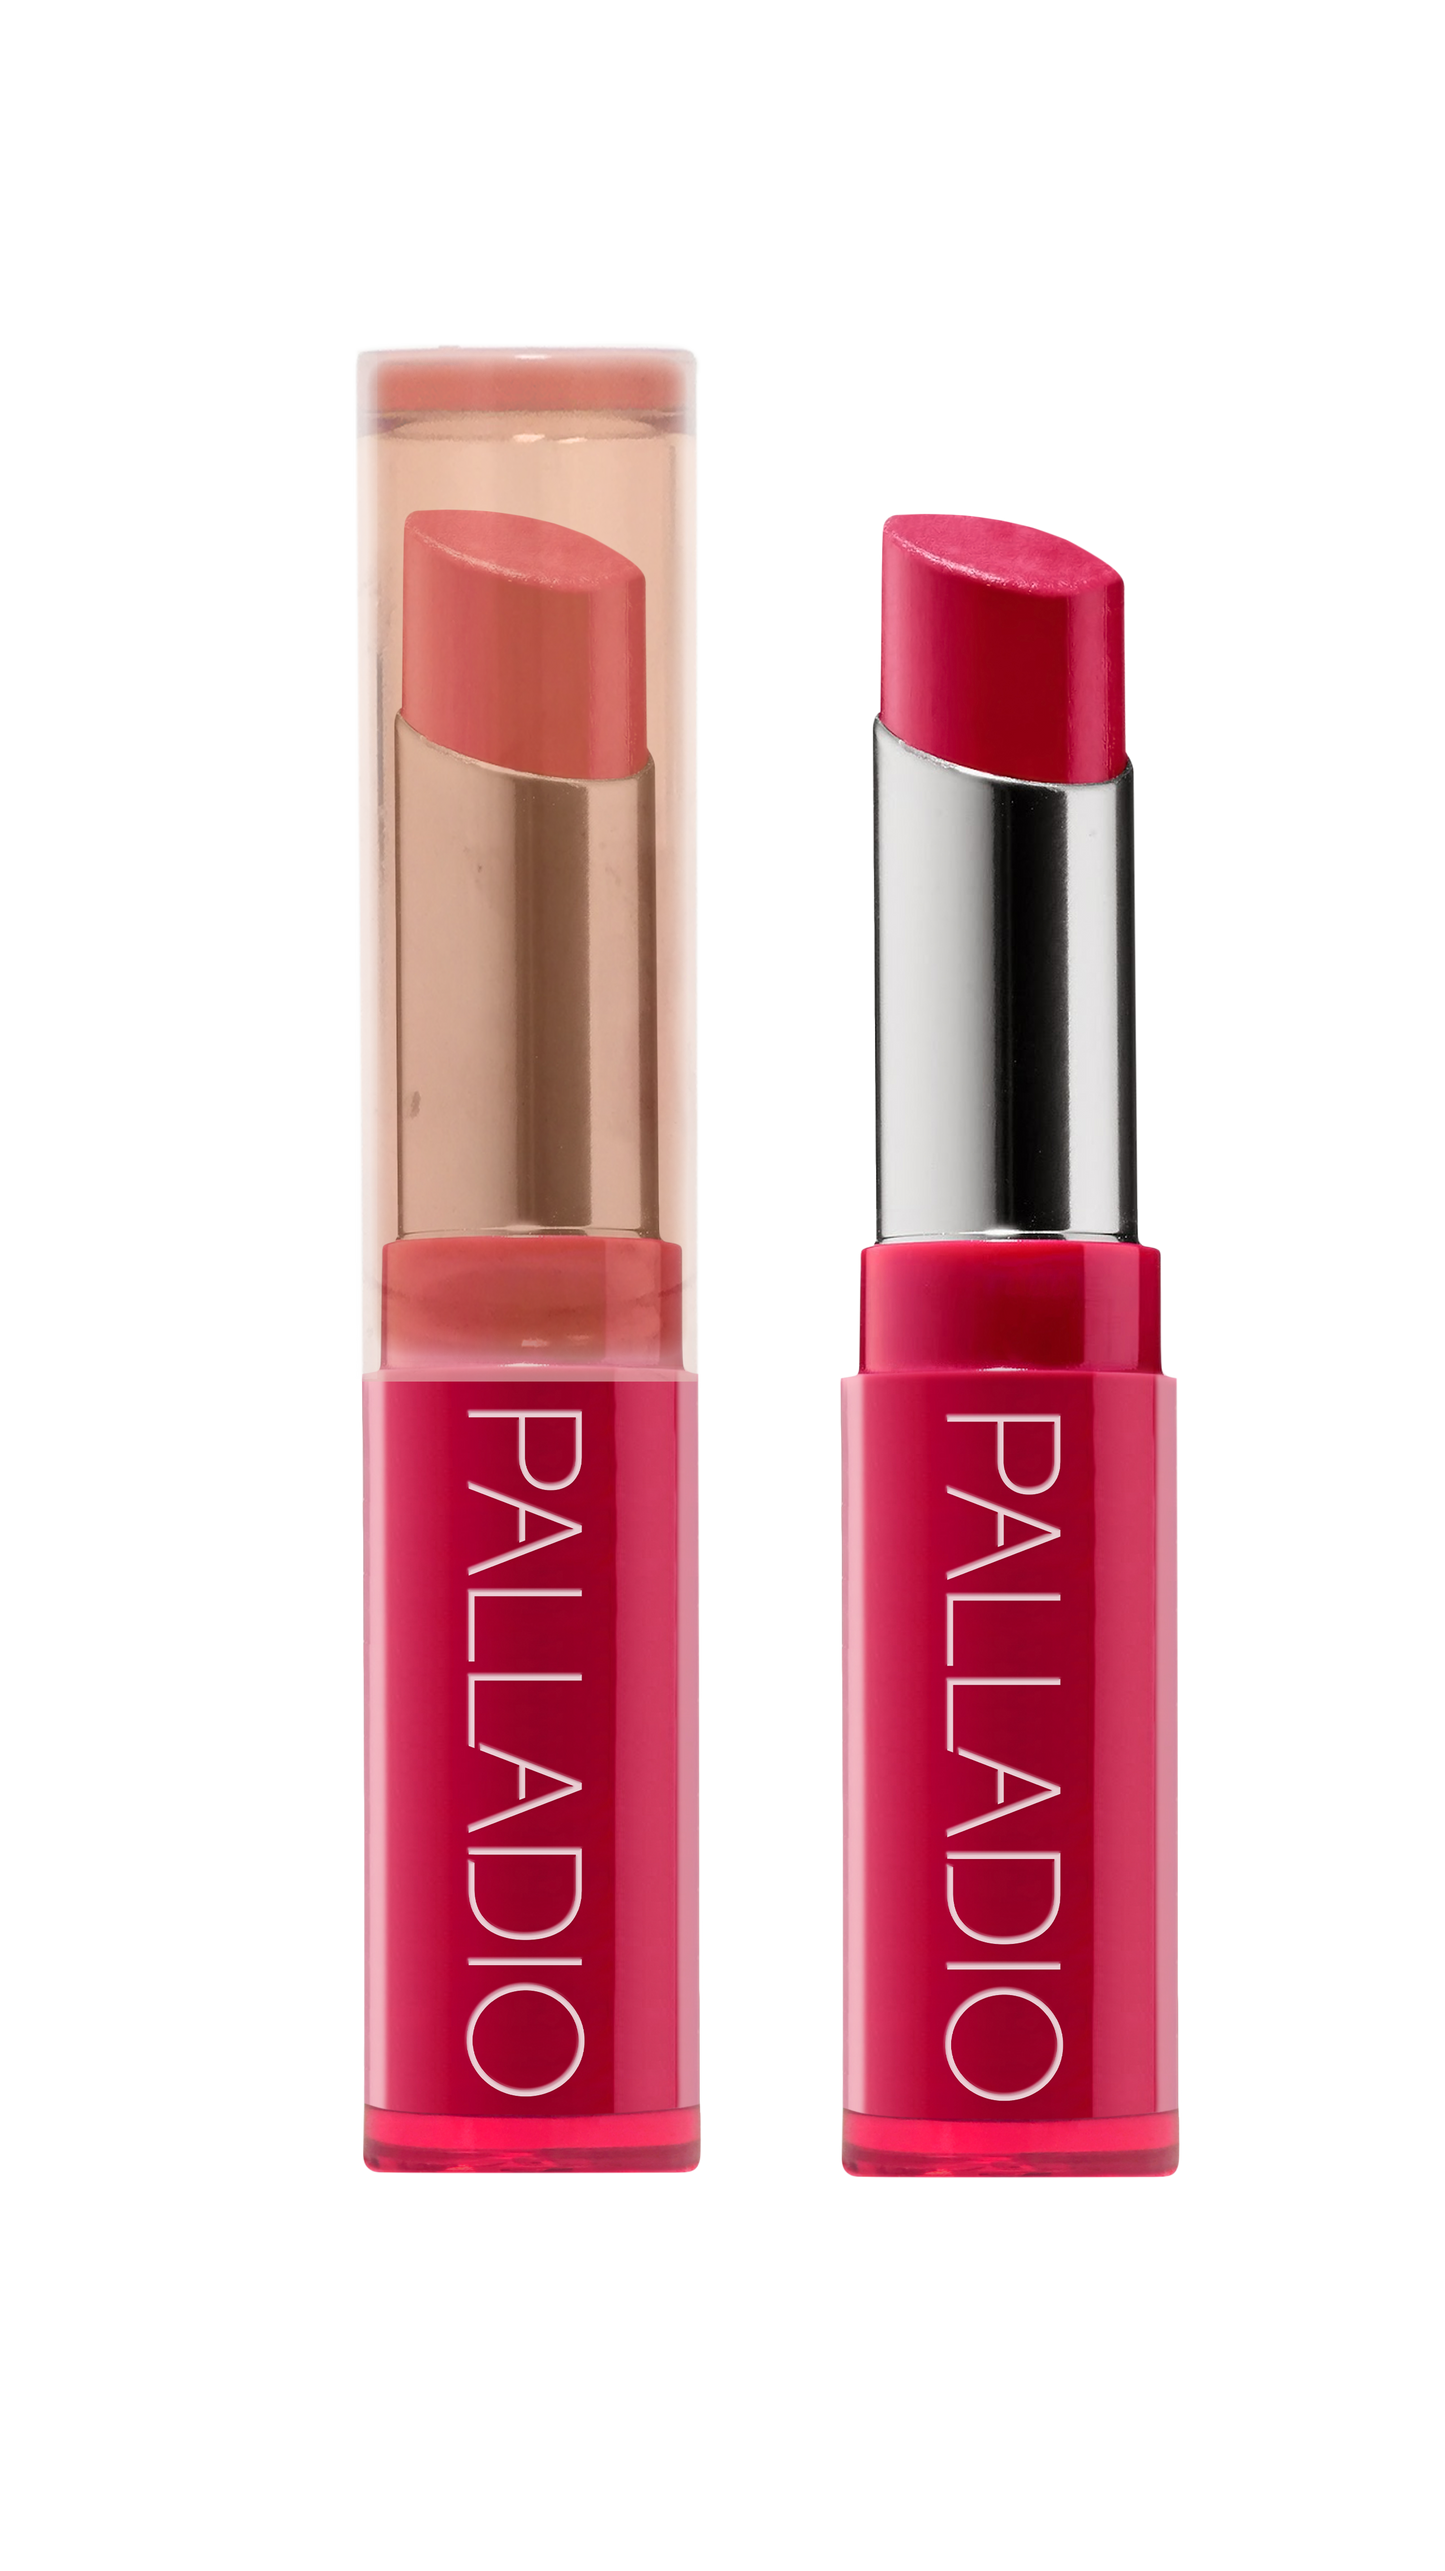 Palladio Butter Me Up! Sheer Color BalmLip ColorPALLADIOColor: Dulce